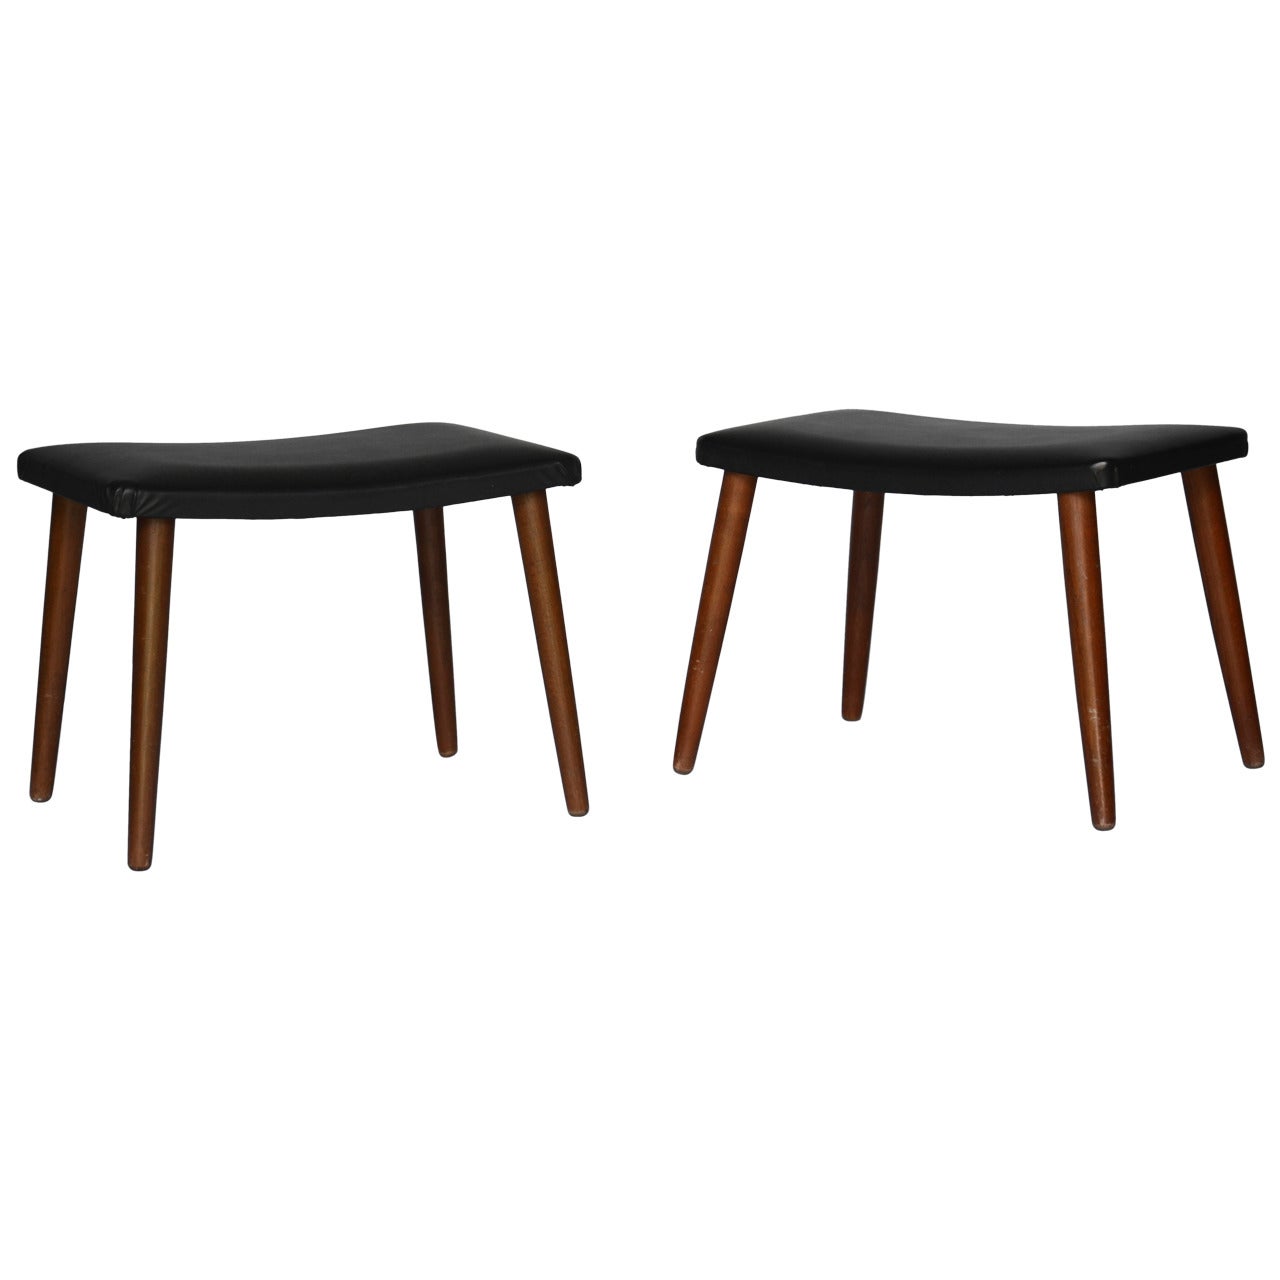 Stools by a Danish furniture manufacturer